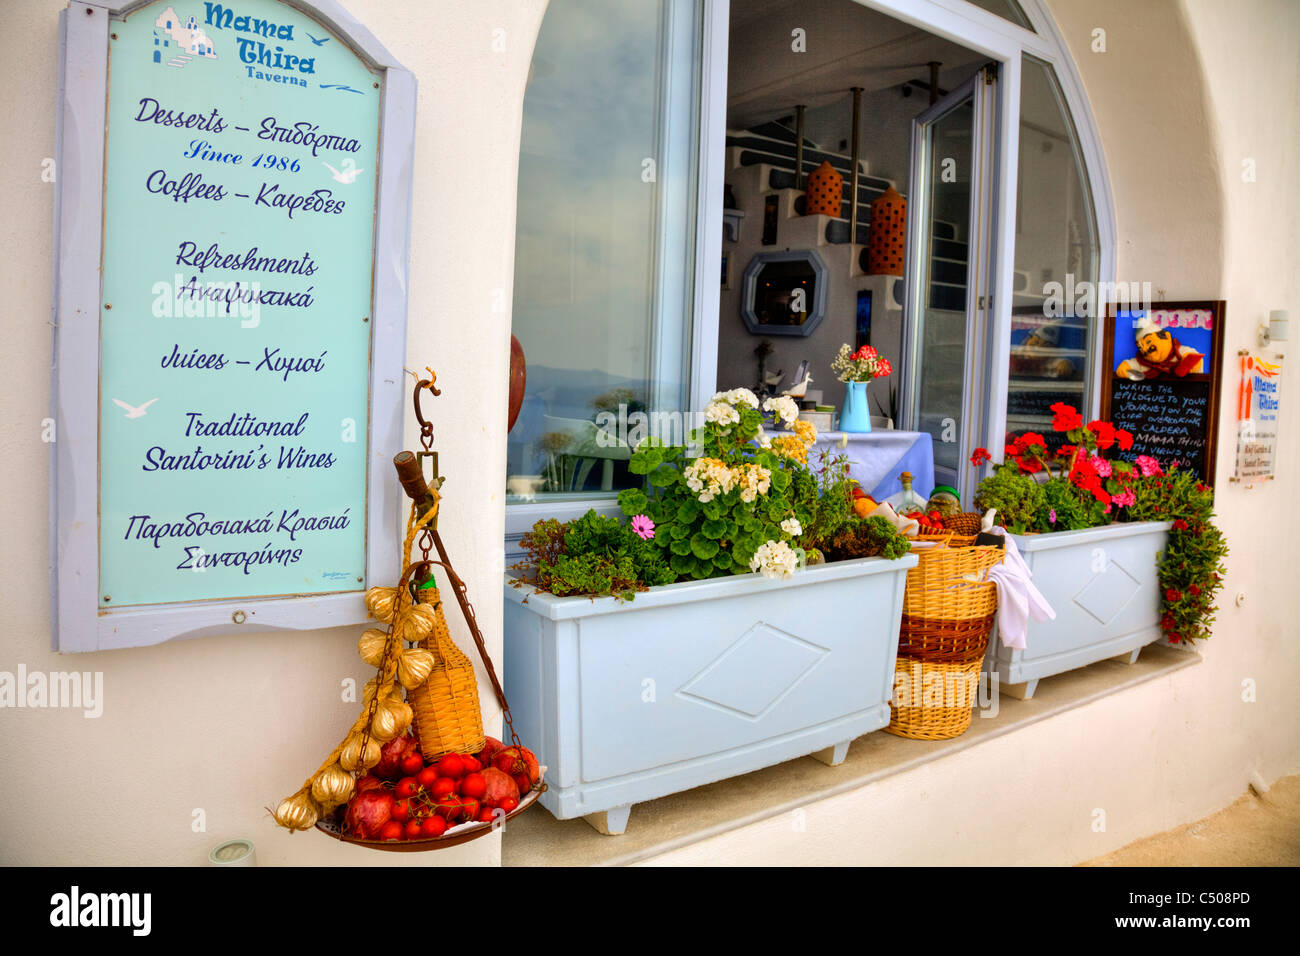 Santorini typical iconic Greek Island restaurant in thira flower box food and menu outside Stock Photo